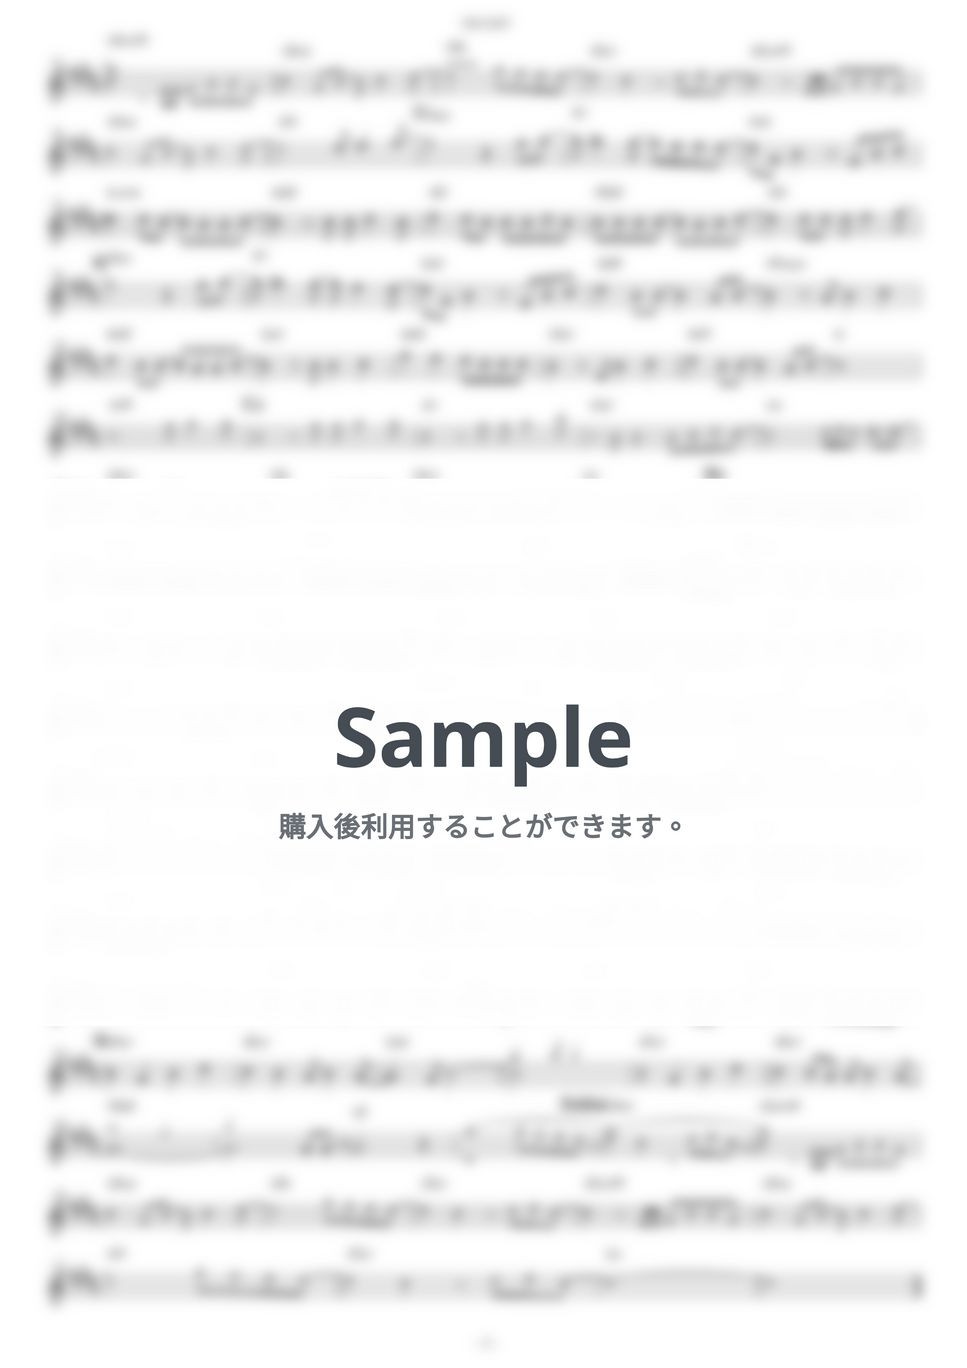 Official髭男dism - SOULSOUP (『劇場版 SPY×FAMILY CODE: White』 / in Eb) by muta-sax